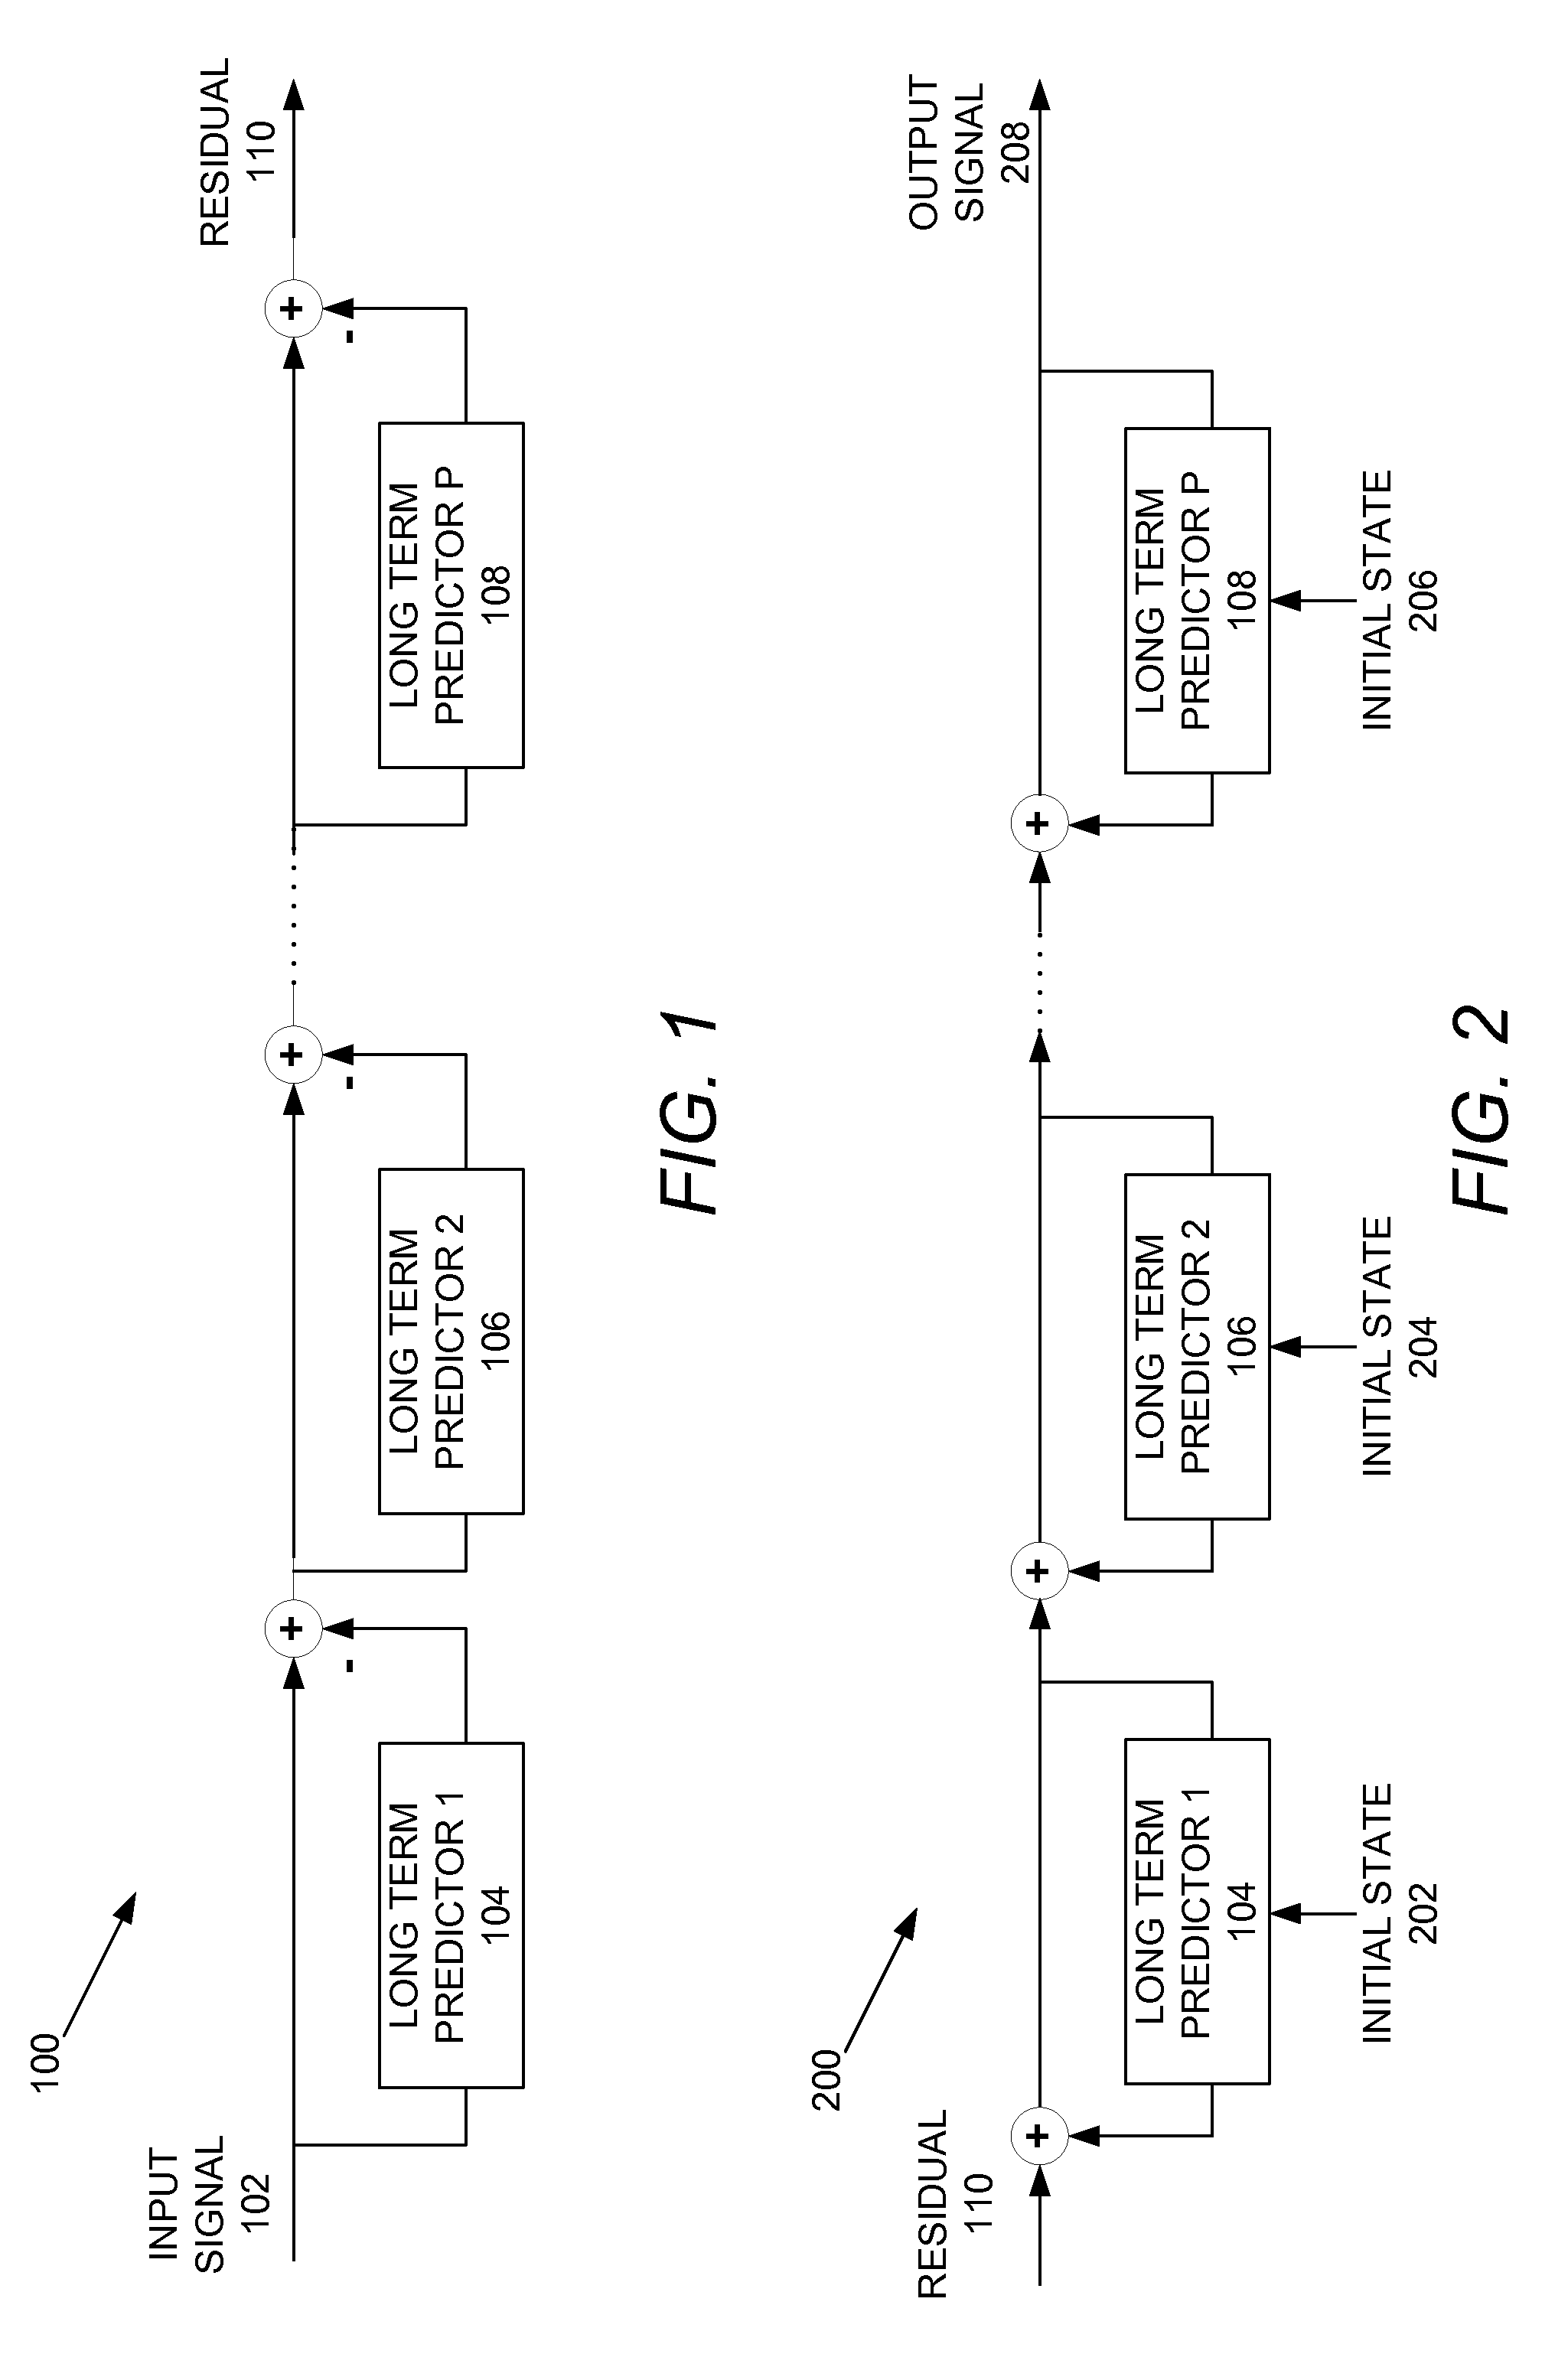 Method and apparatus for polyphonic audio signal prediction in coding and networking systems